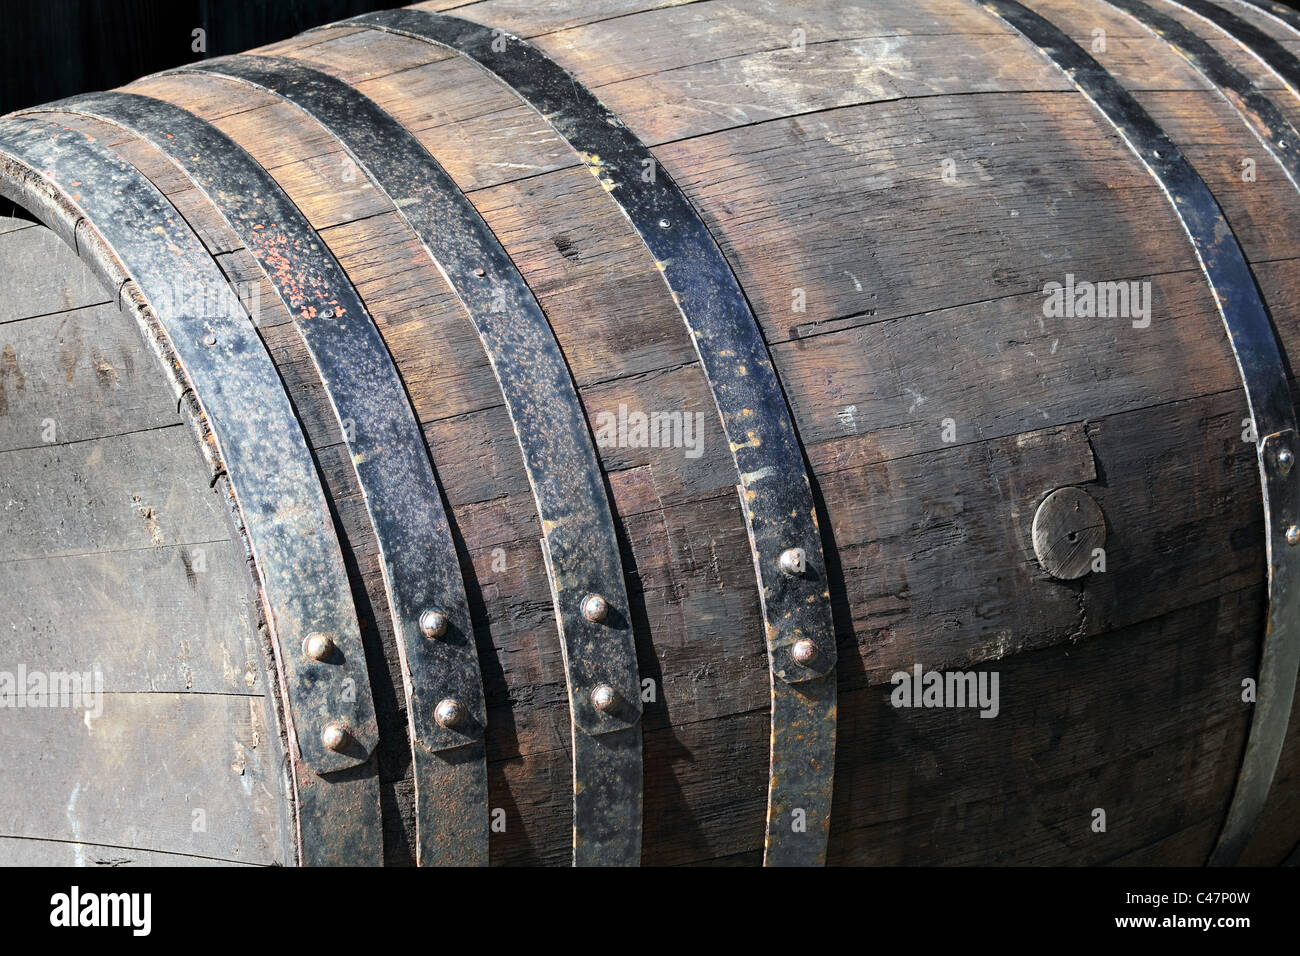 Old wooden barrel cask for alcohol Stock Photo